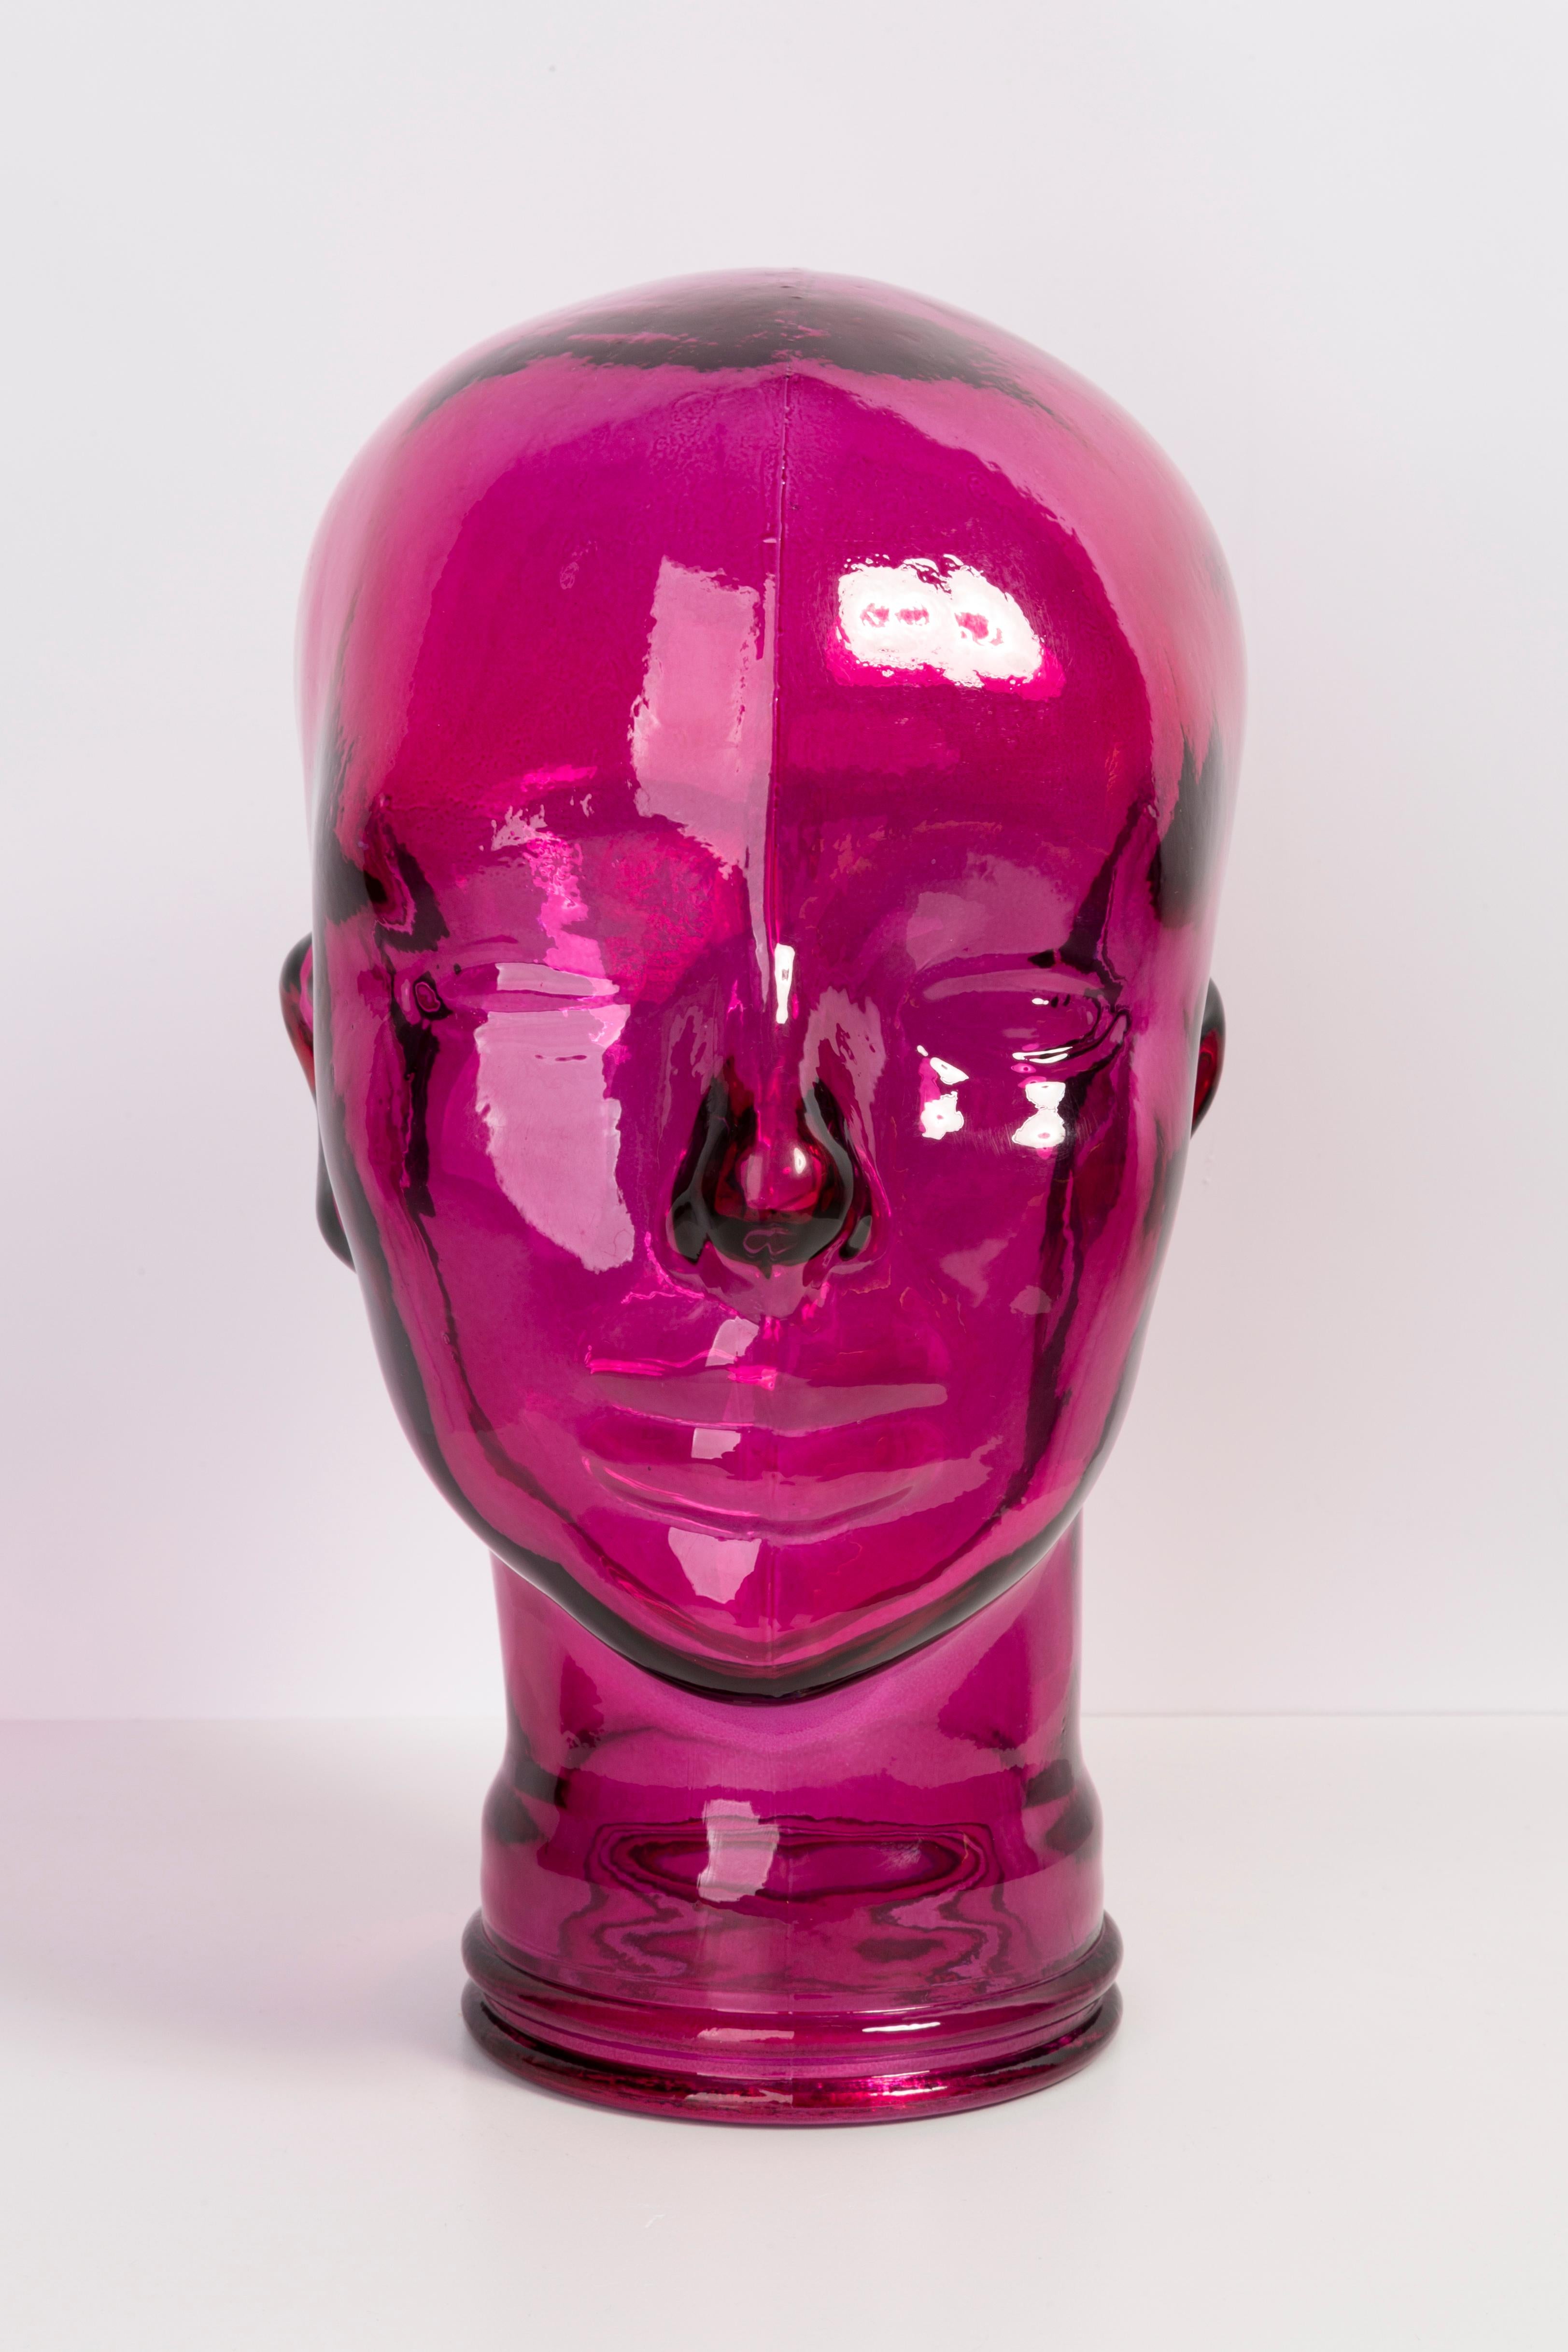 Life-size glass head in a unique lilac color. Produced in a German steelworks in the 1970s. Perfect condition. A perfect addition to the interior, photo prop, display or headphone stand.